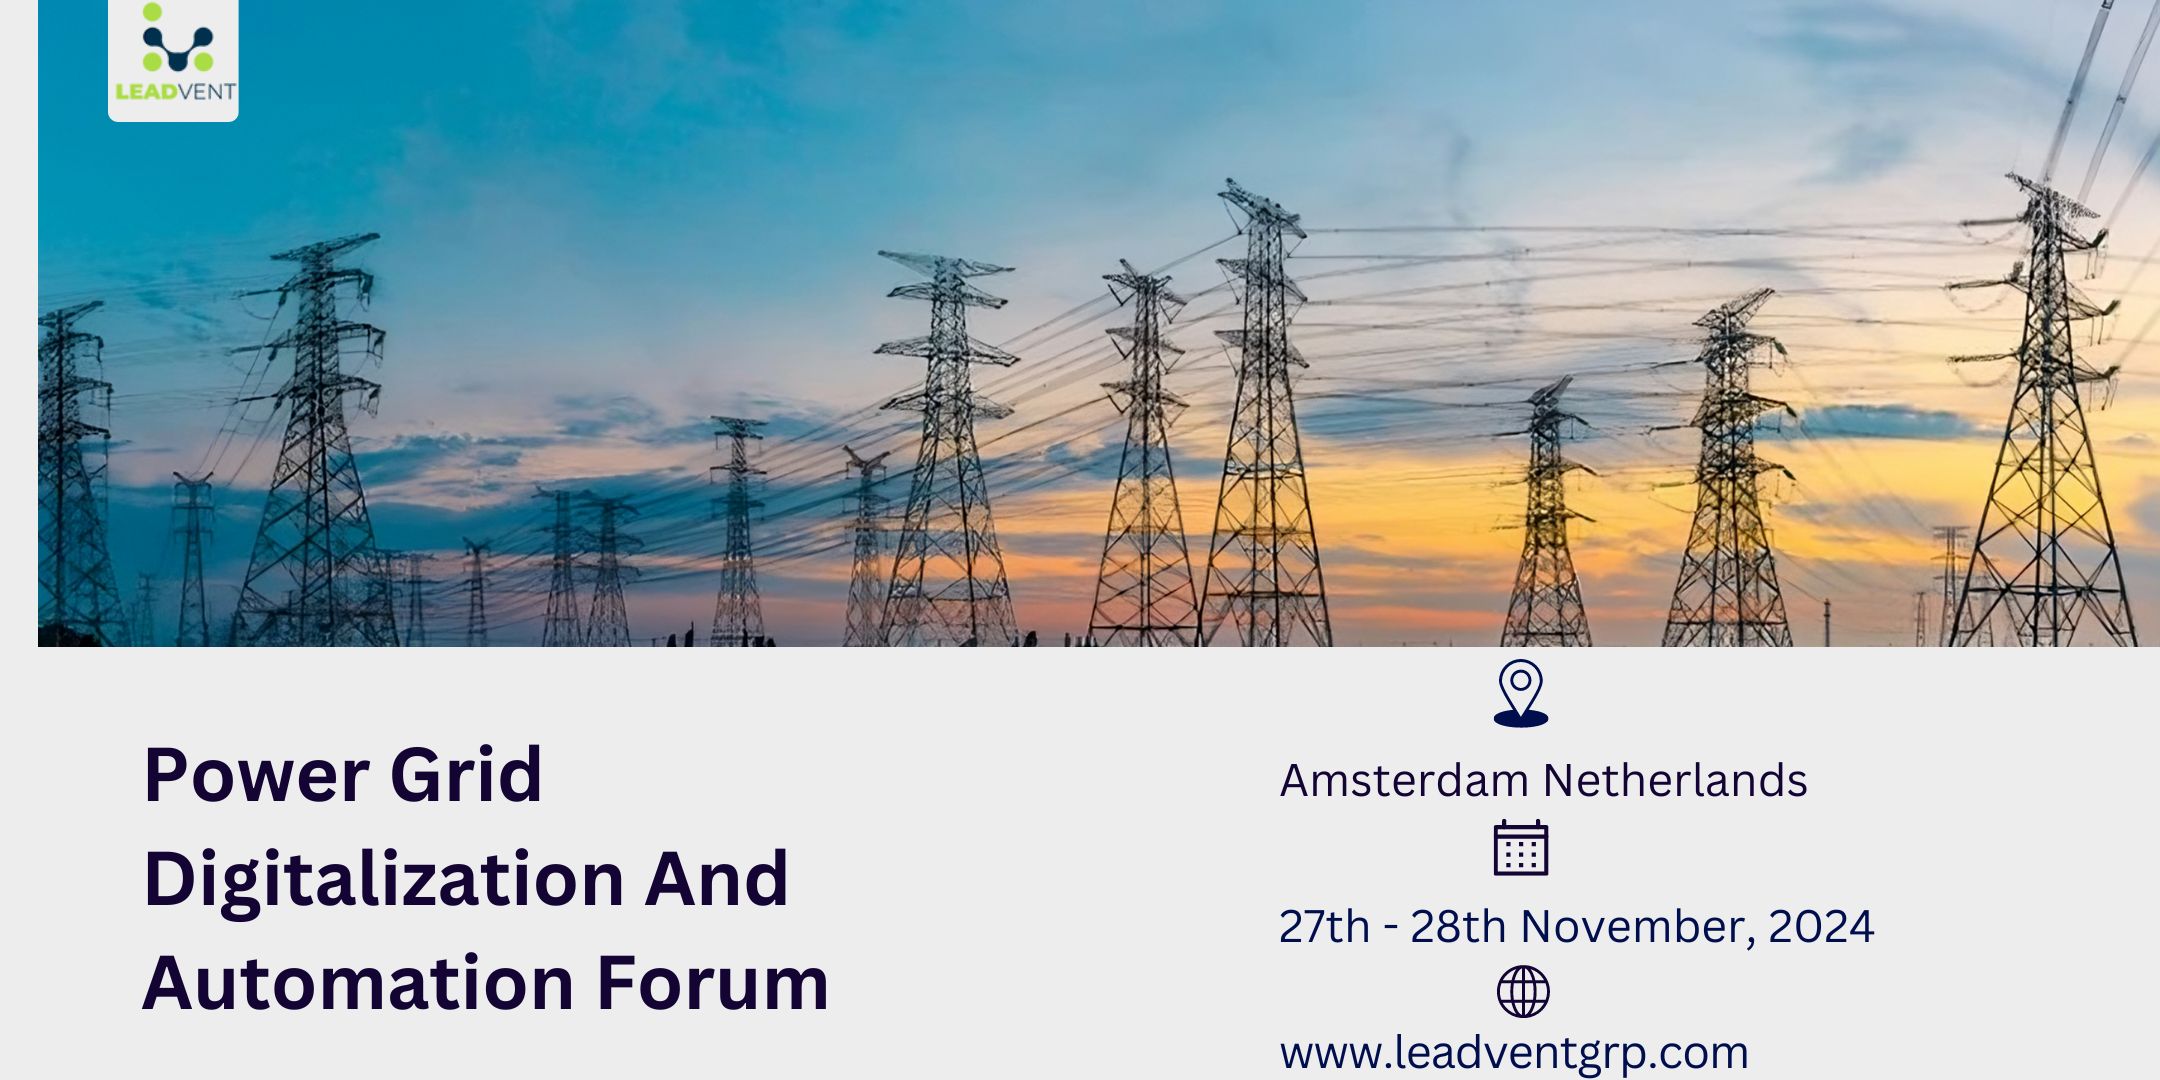 Power Grid Digitalization and Automation Forum organized by Leadvent Group